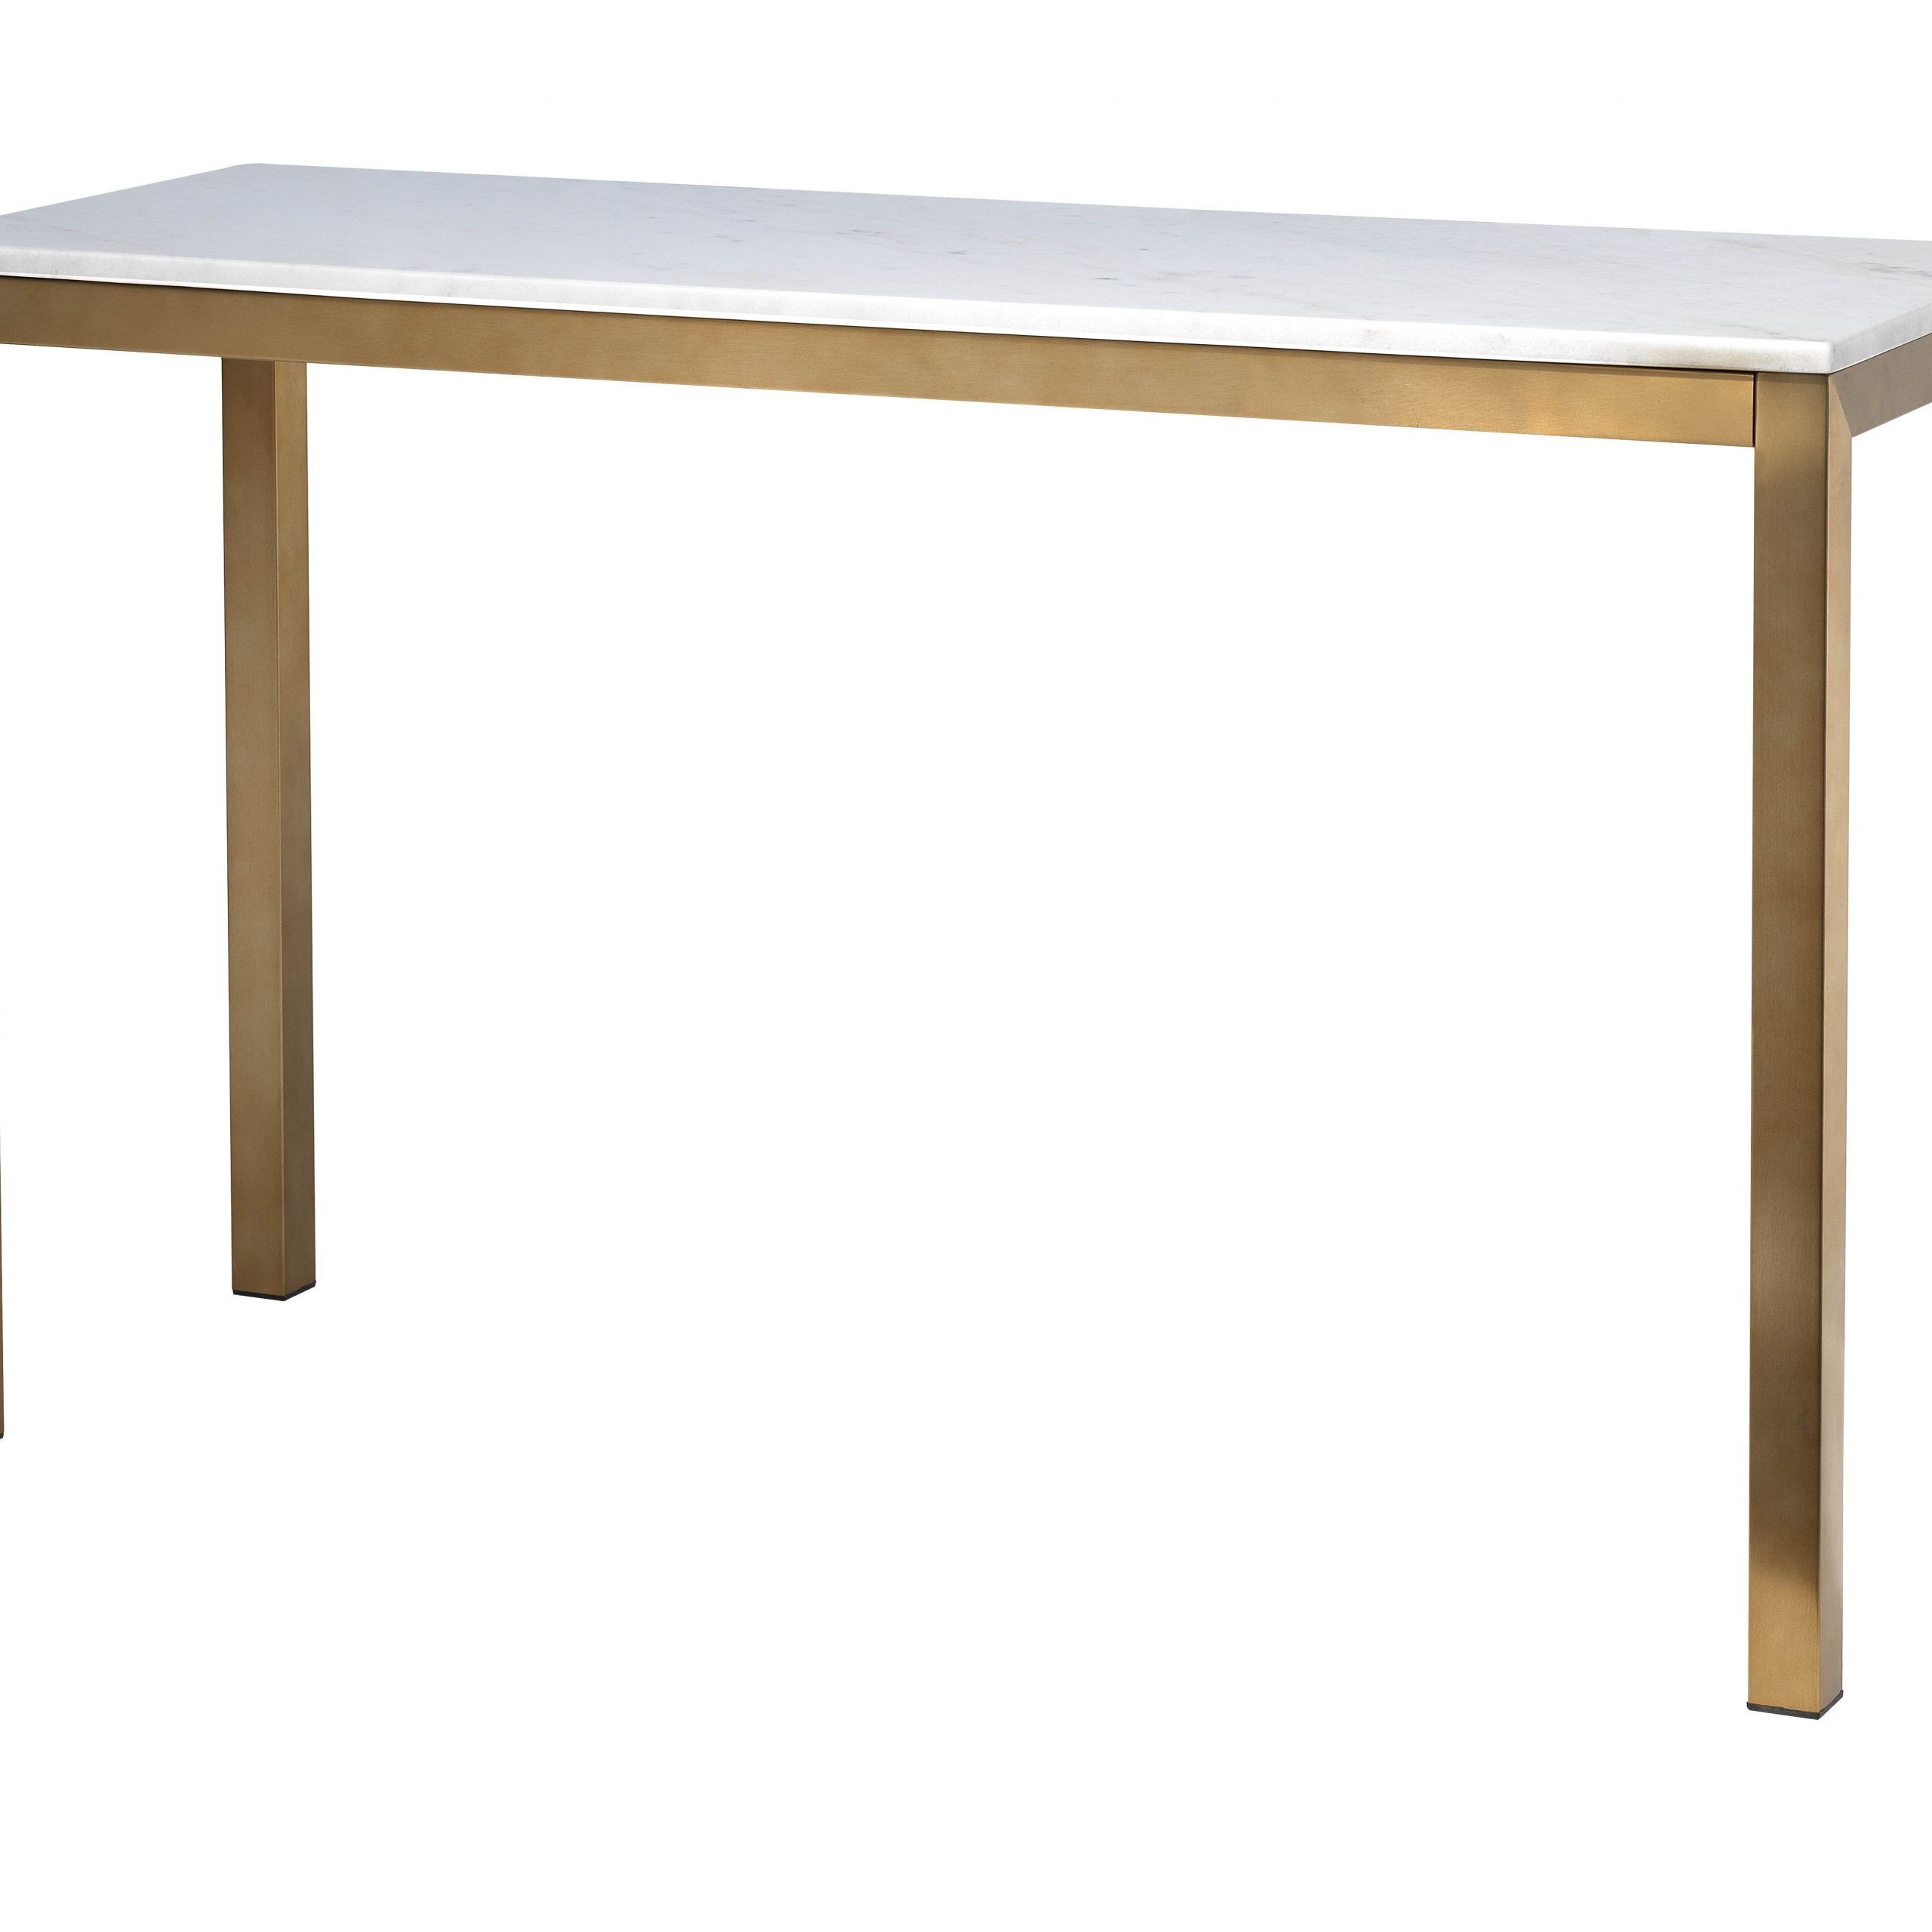 Coast To Coast Gold White Marble Console Table | The Classy Home In White Stone Console Tables (View 1 of 20)